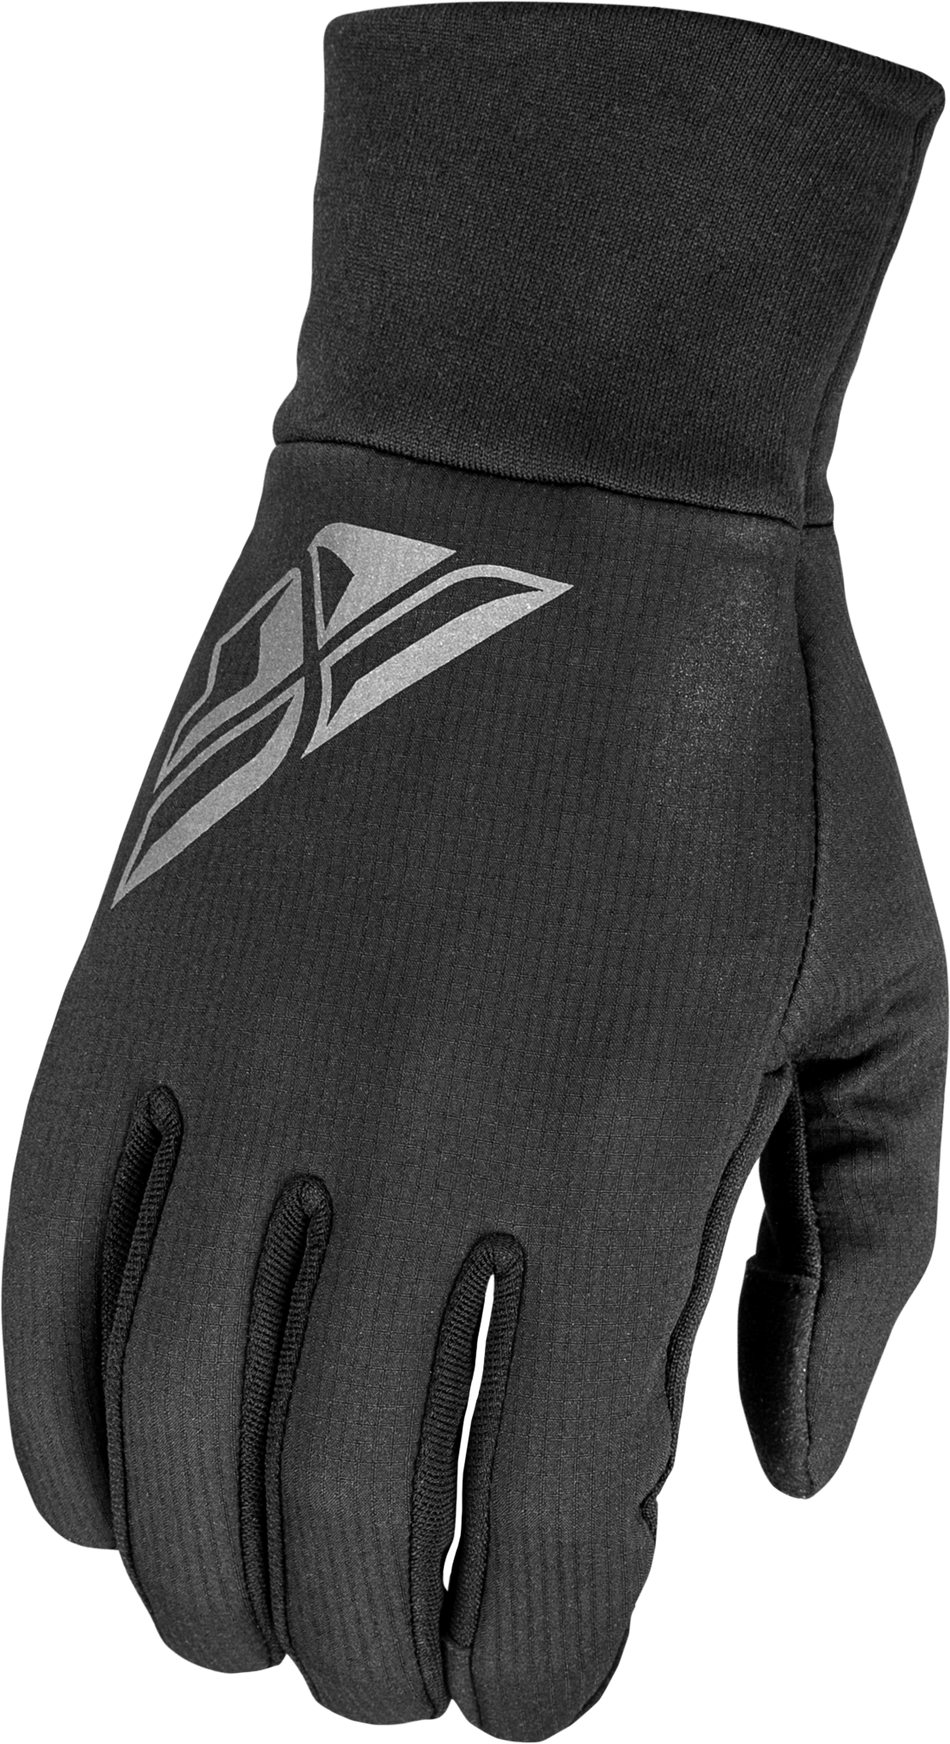 FLY RACING Glove Liners Black Sm 363-3960S